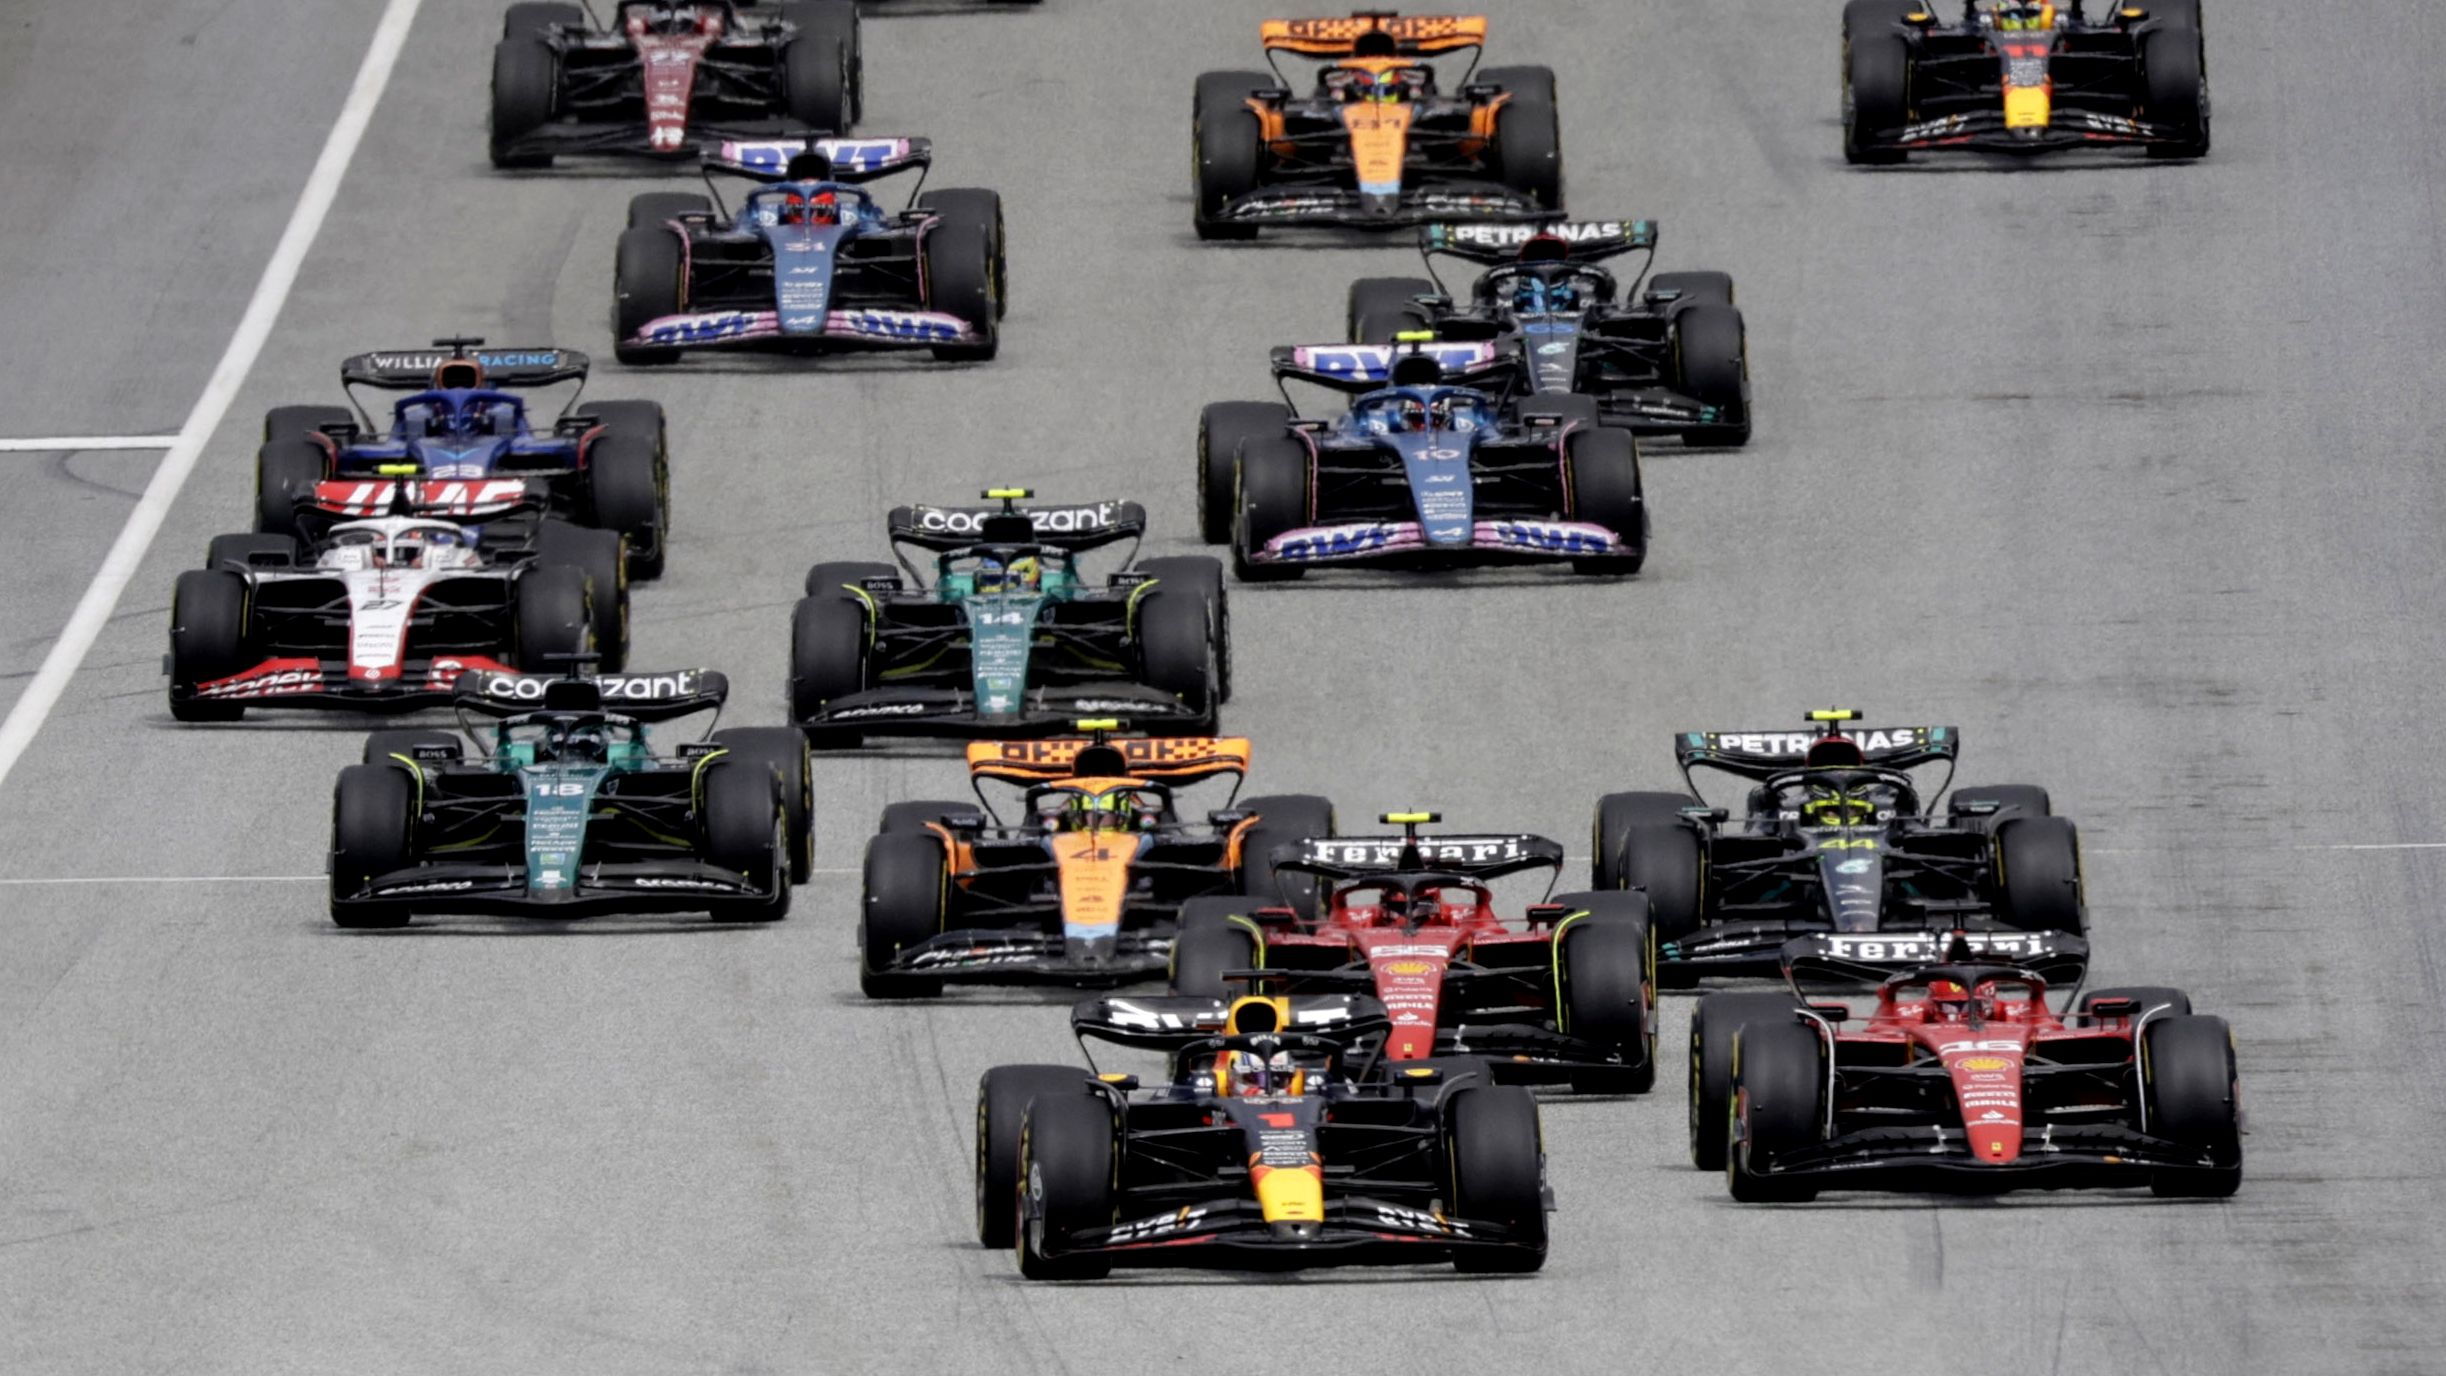 The Formula 1 grid is made up of 10 teams and 20 cars.